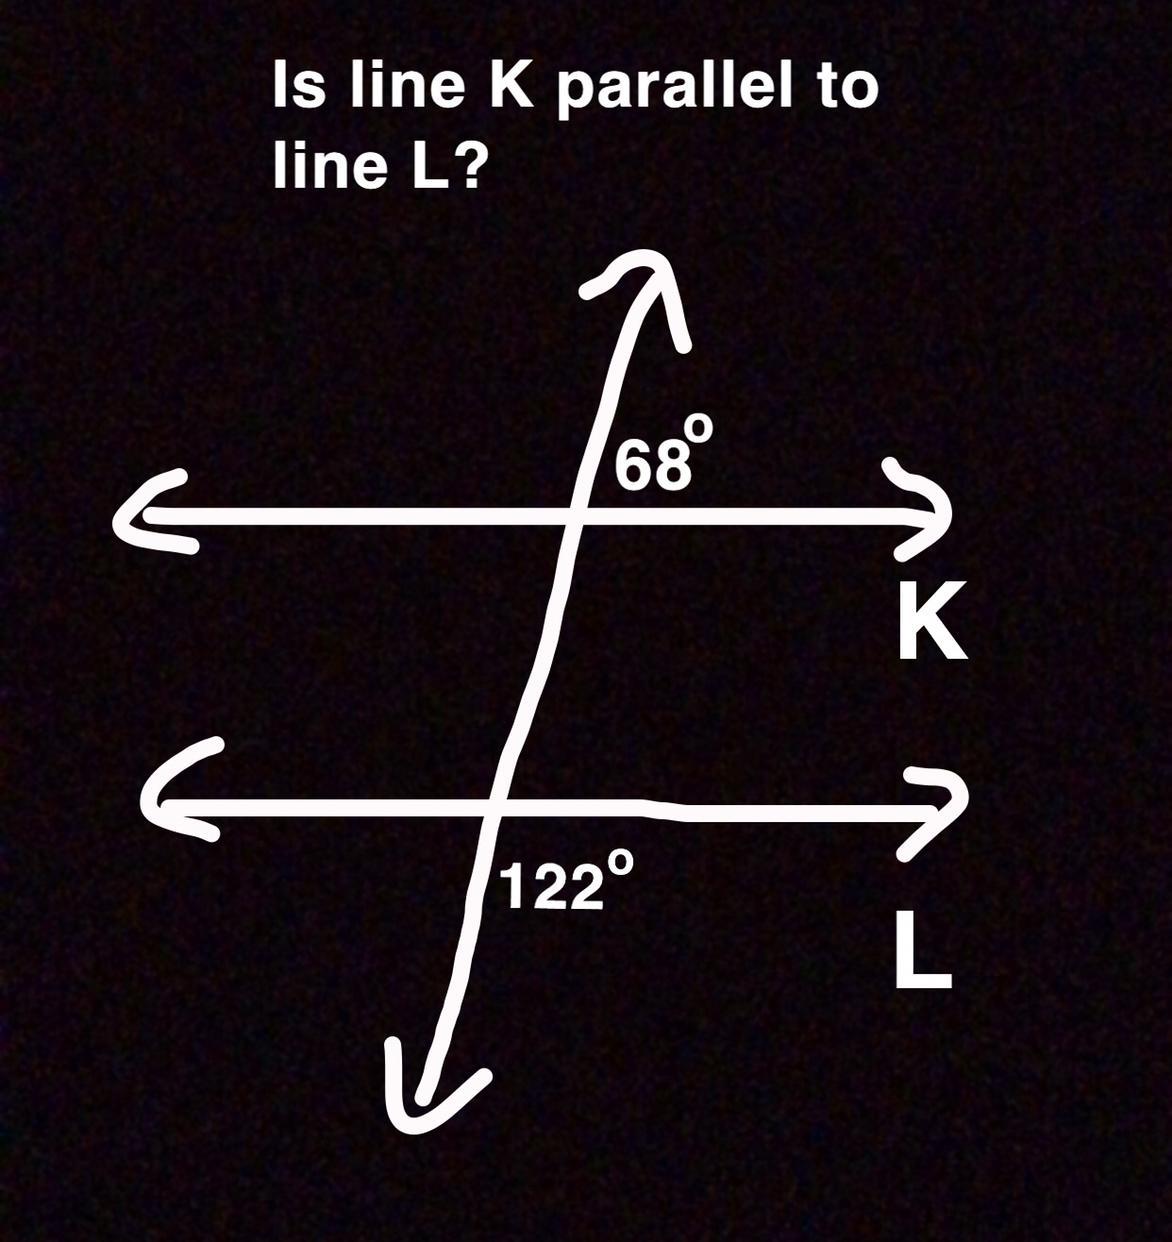 I Dont Really Know If The Lines Are Parallel An Explanation Would Be Helpful Thanks